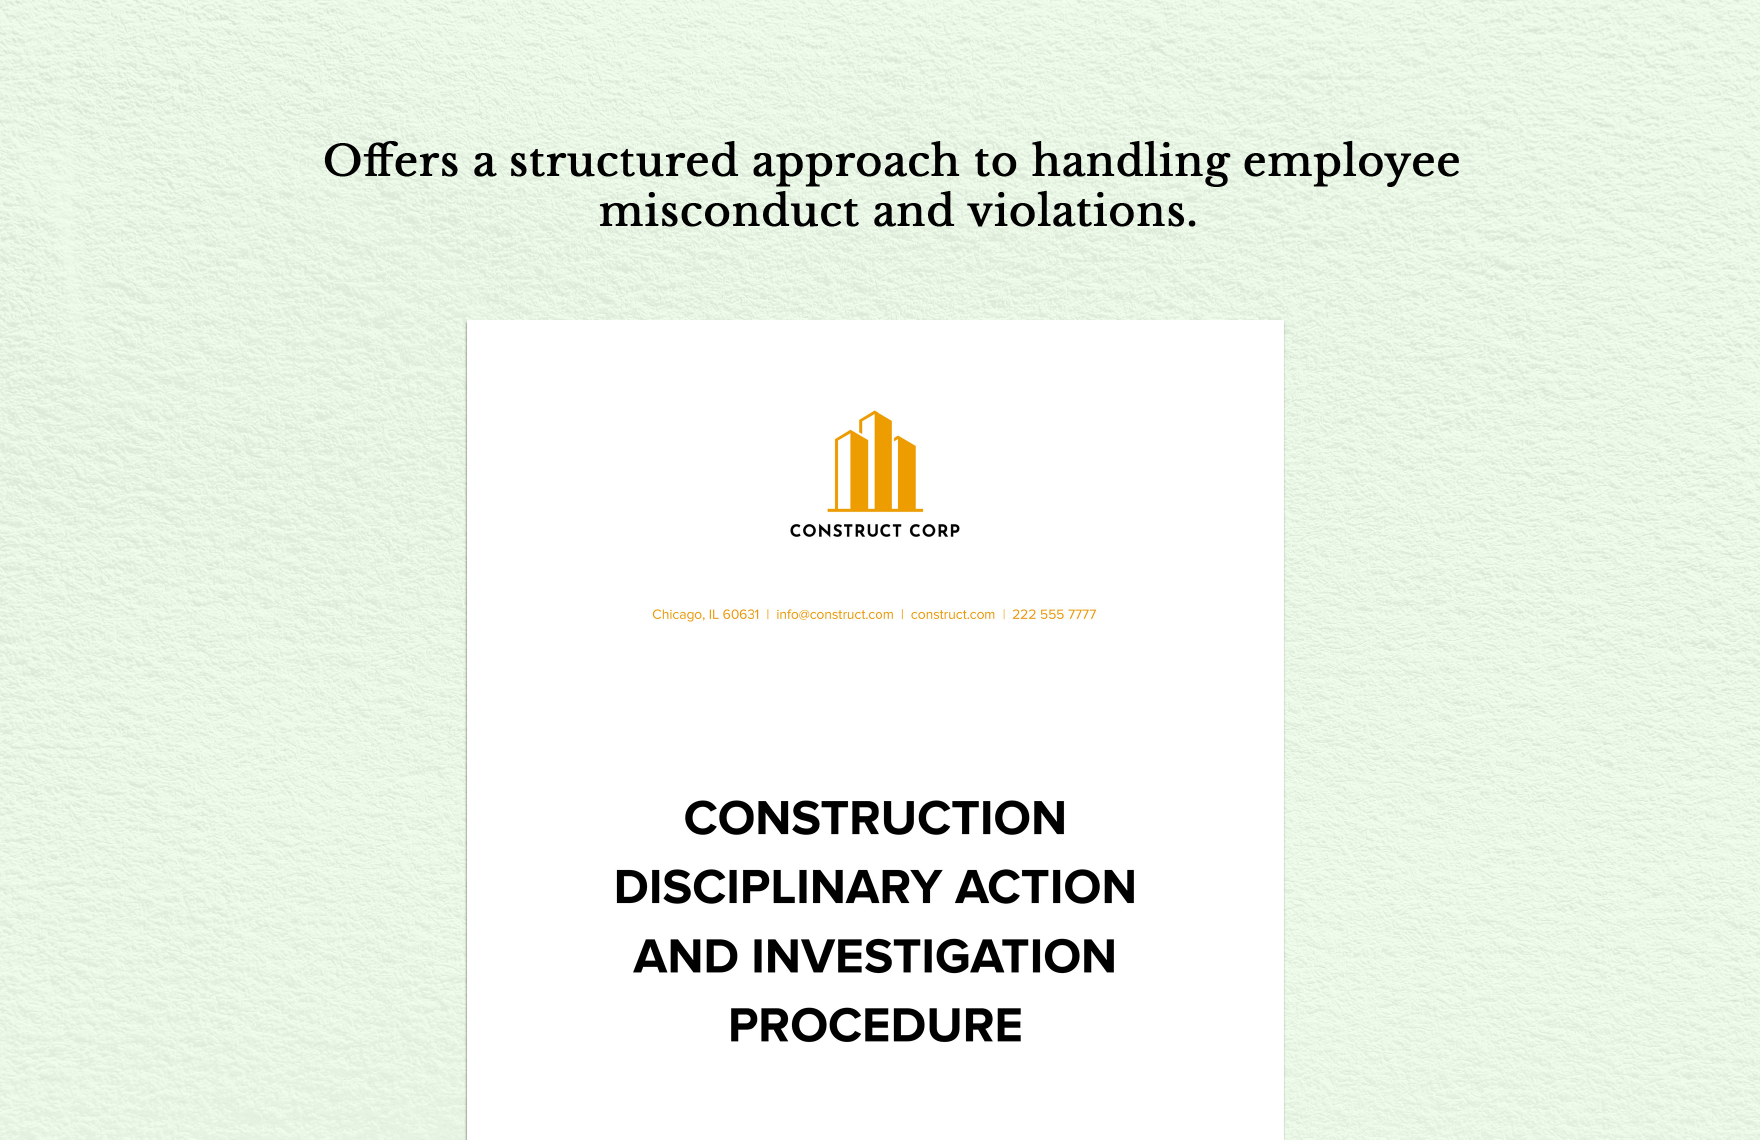 Construction Disciplinary Action and Investigation Procedure 